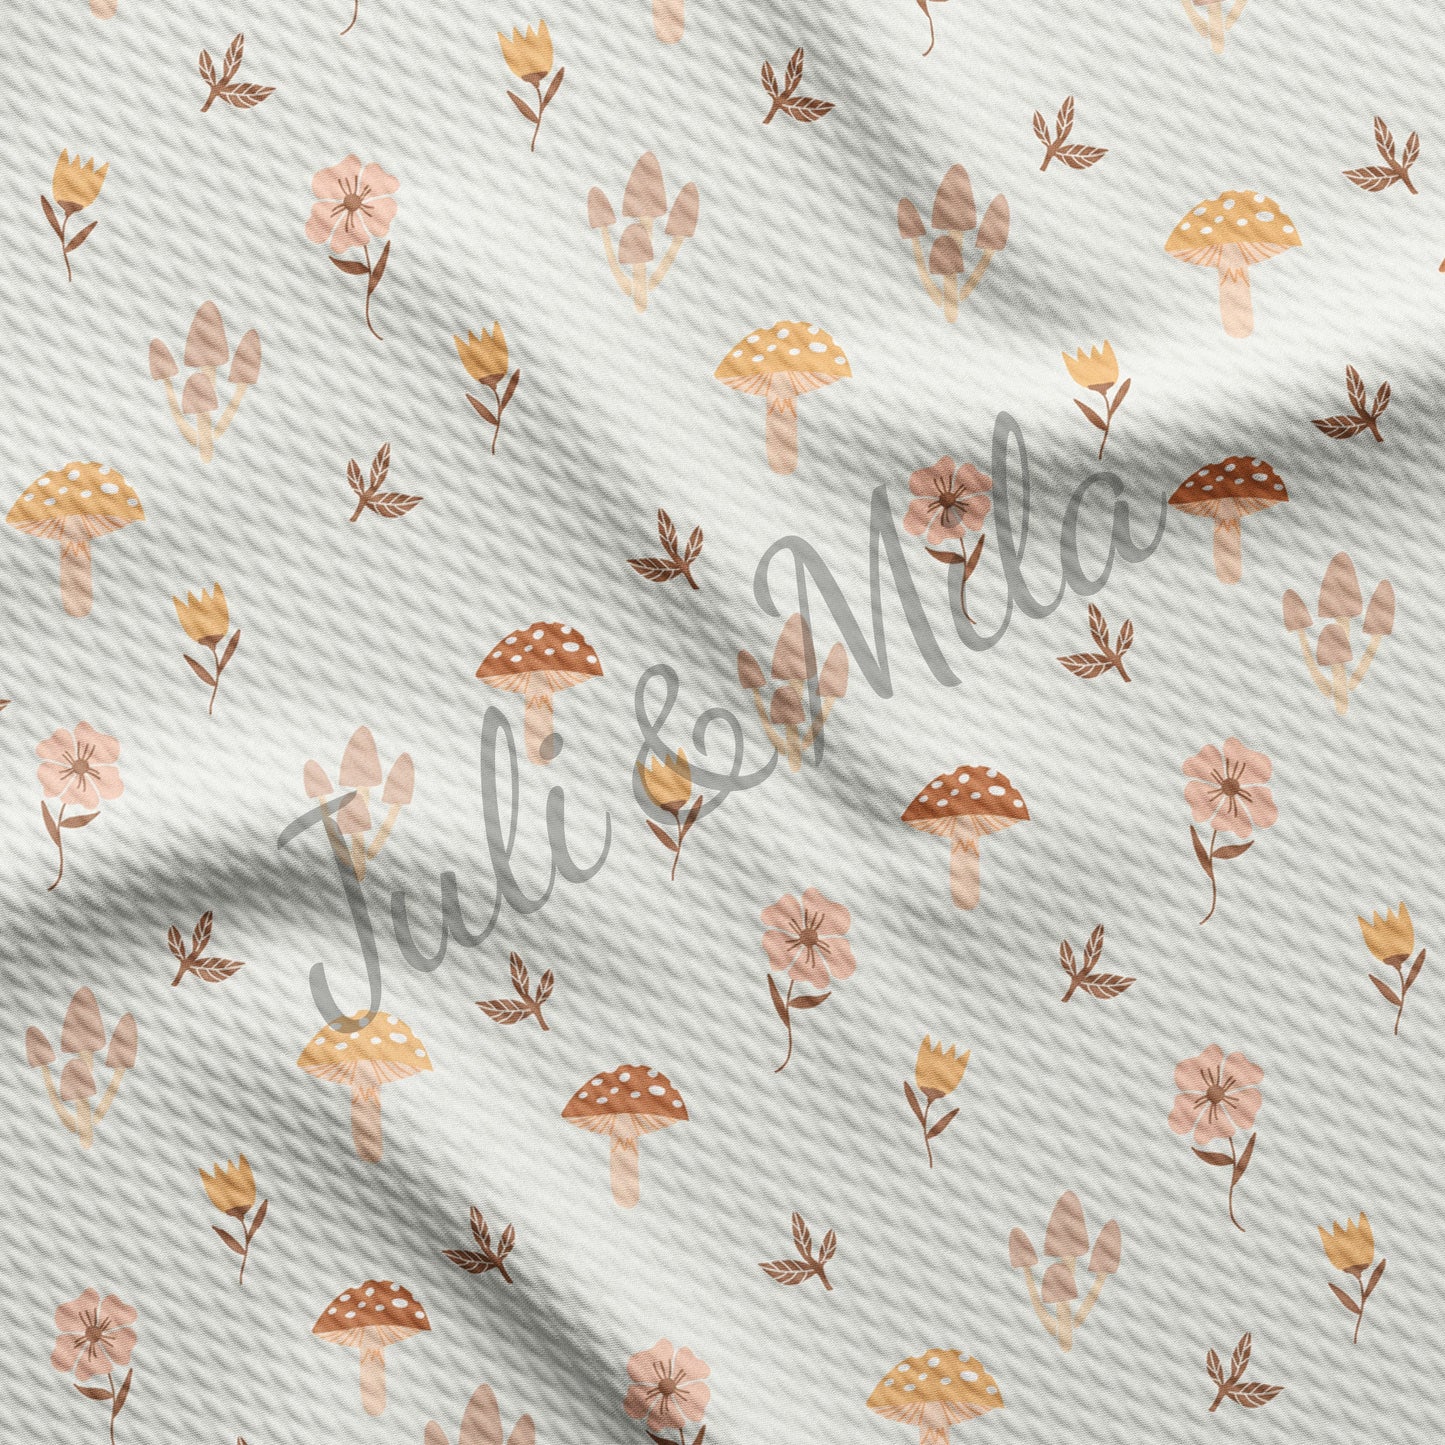 Bullet Textured Fabric Floral95